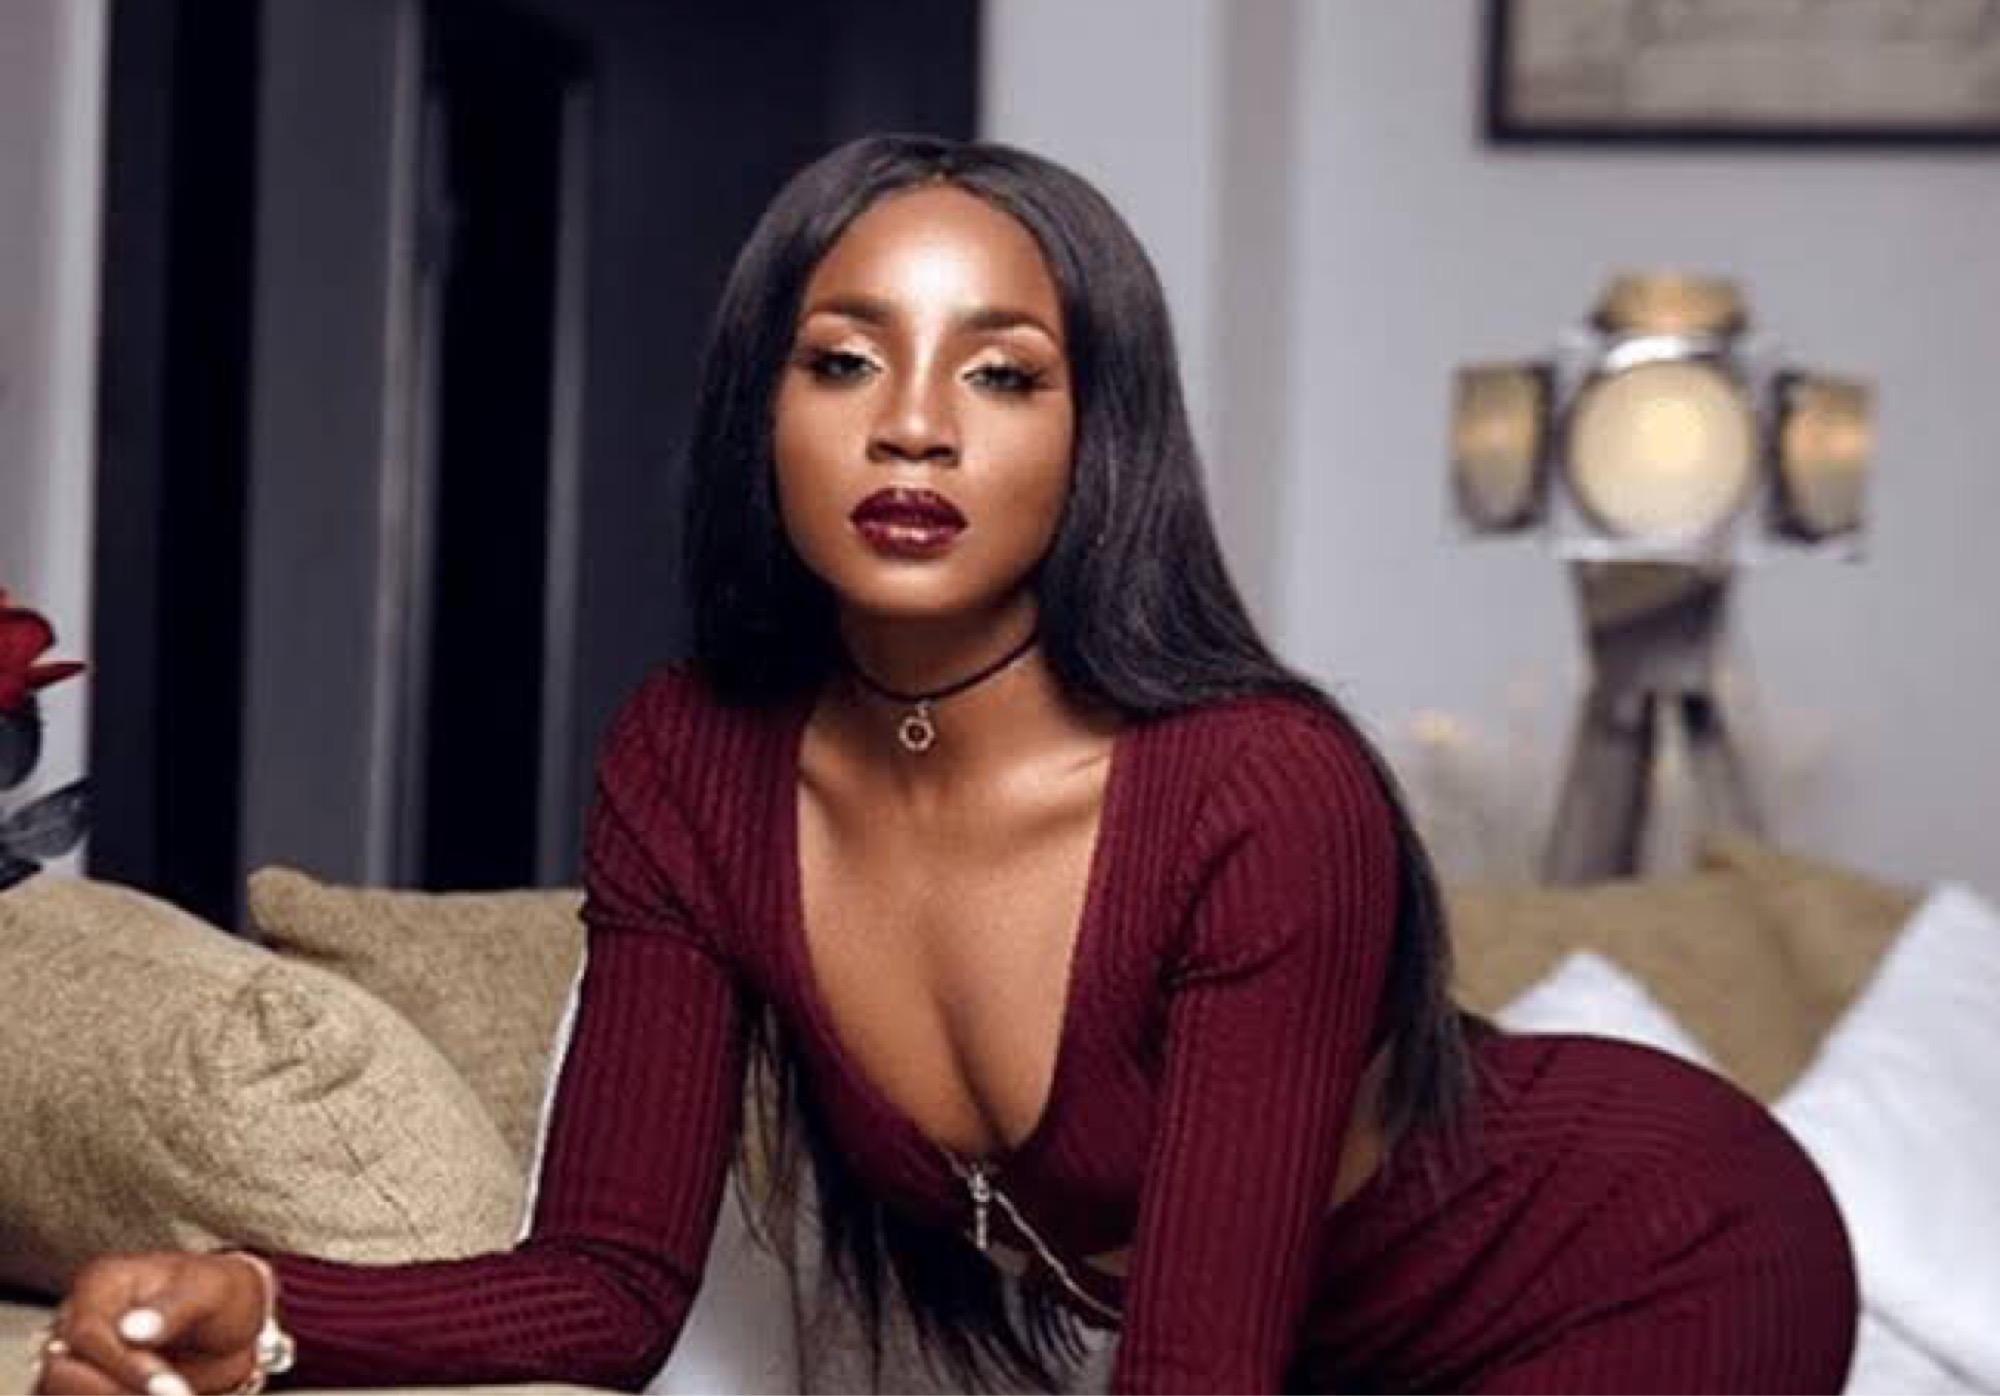 Singer Seyi Shay Releases Raunchy Photo On Instagram